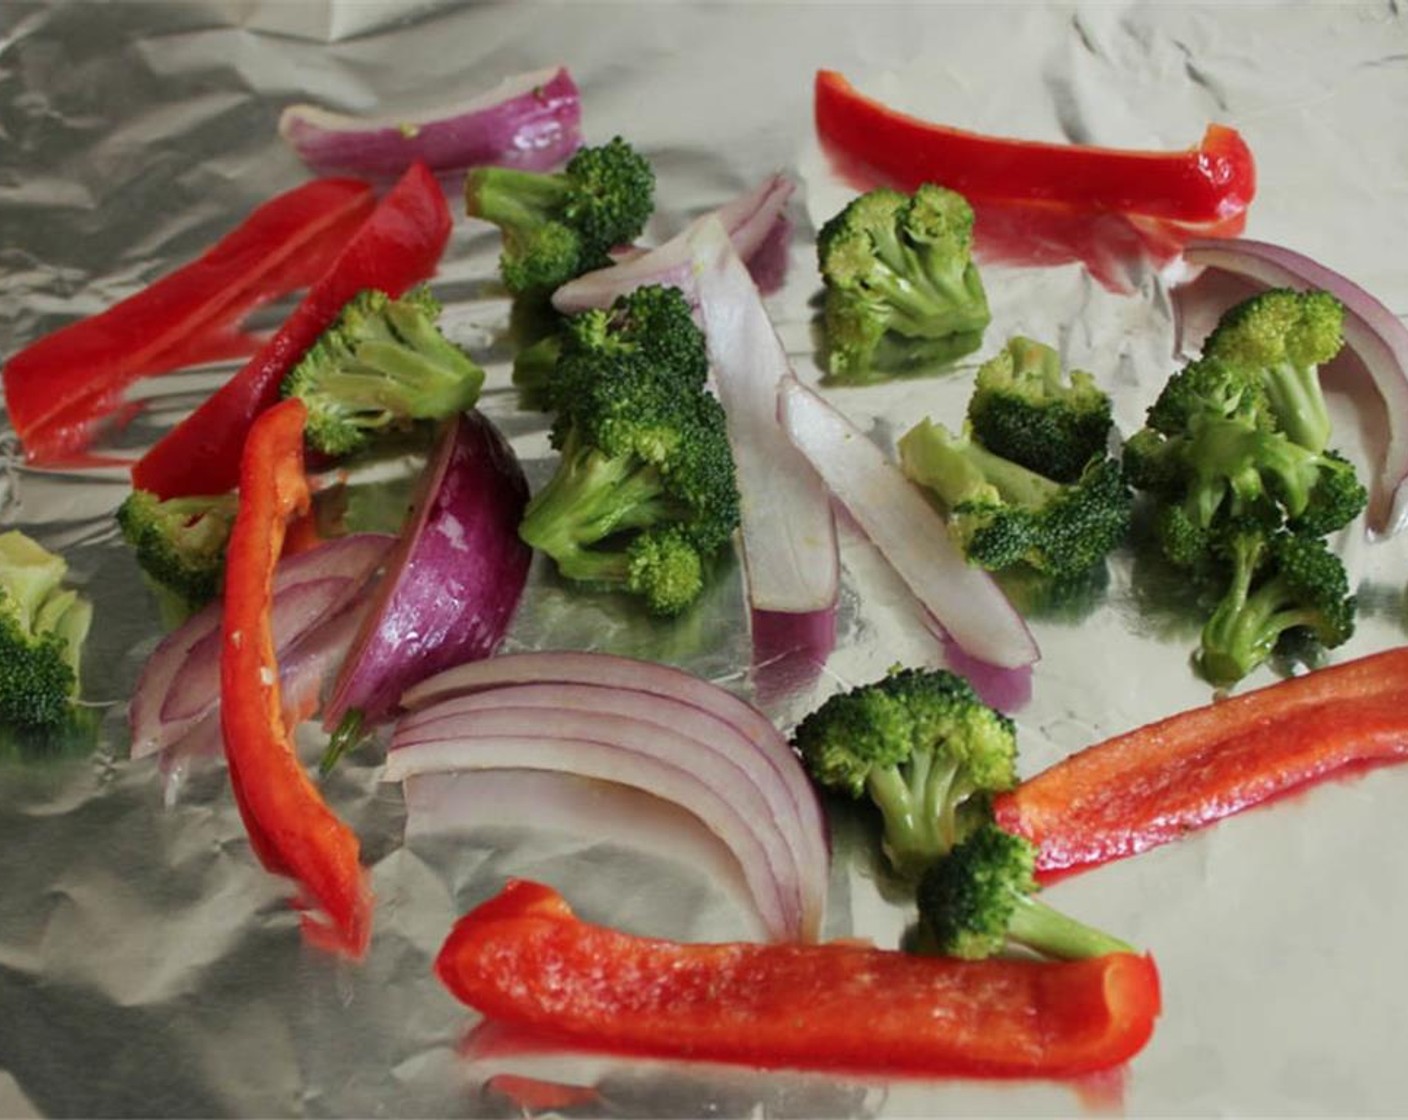 step 11 Place the Broccoli Florets (1/3 cup), Red Bell Pepper (1/2) and Red Onion (1/4) on a foil-lined baking sheet. Drizzle with Olive Oil (1/2 Tbsp) and sprinkle with Salt.